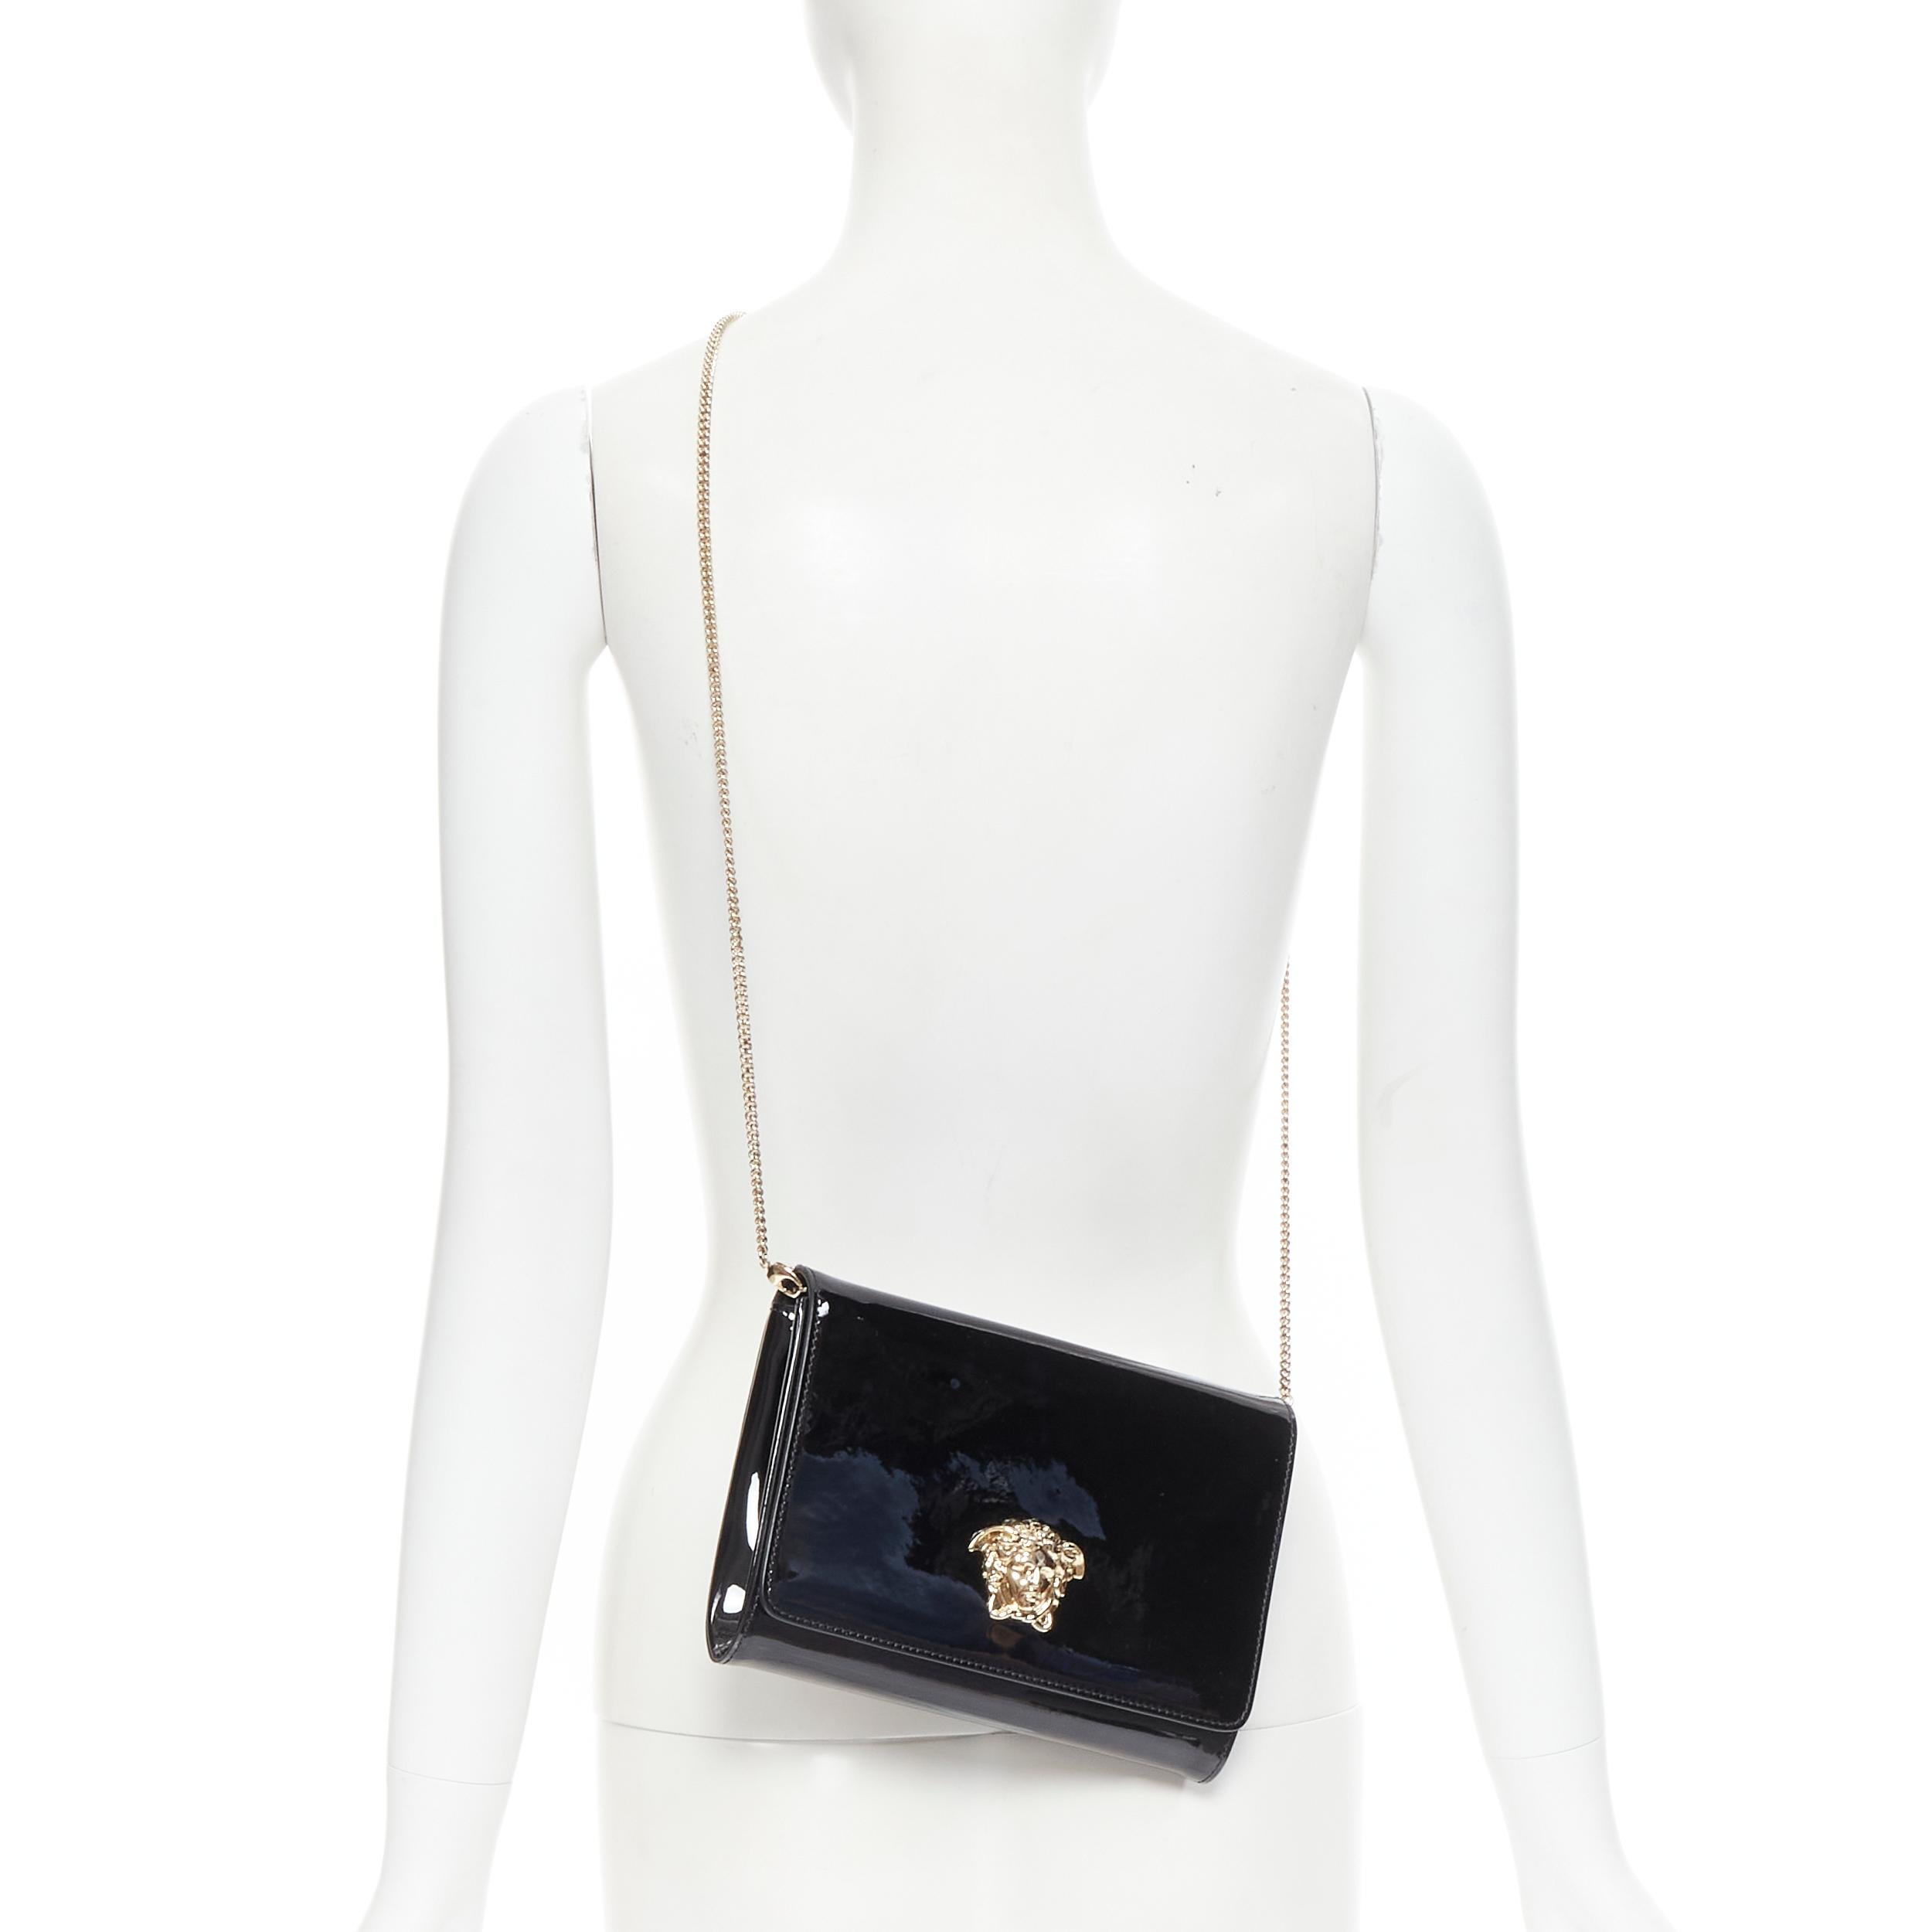 new VERSACE Palazzo Medusa black patent gold chain crossbody clutch bag
Reference: MAWG/A00057 
Brand: Versace 
Designer: Donatella Versace 
Model: Palazzo Medusa clutch 
Material: Patent Leather 
Color: Black 
Pattern: Solid 
Closure: Magnet 
Extra